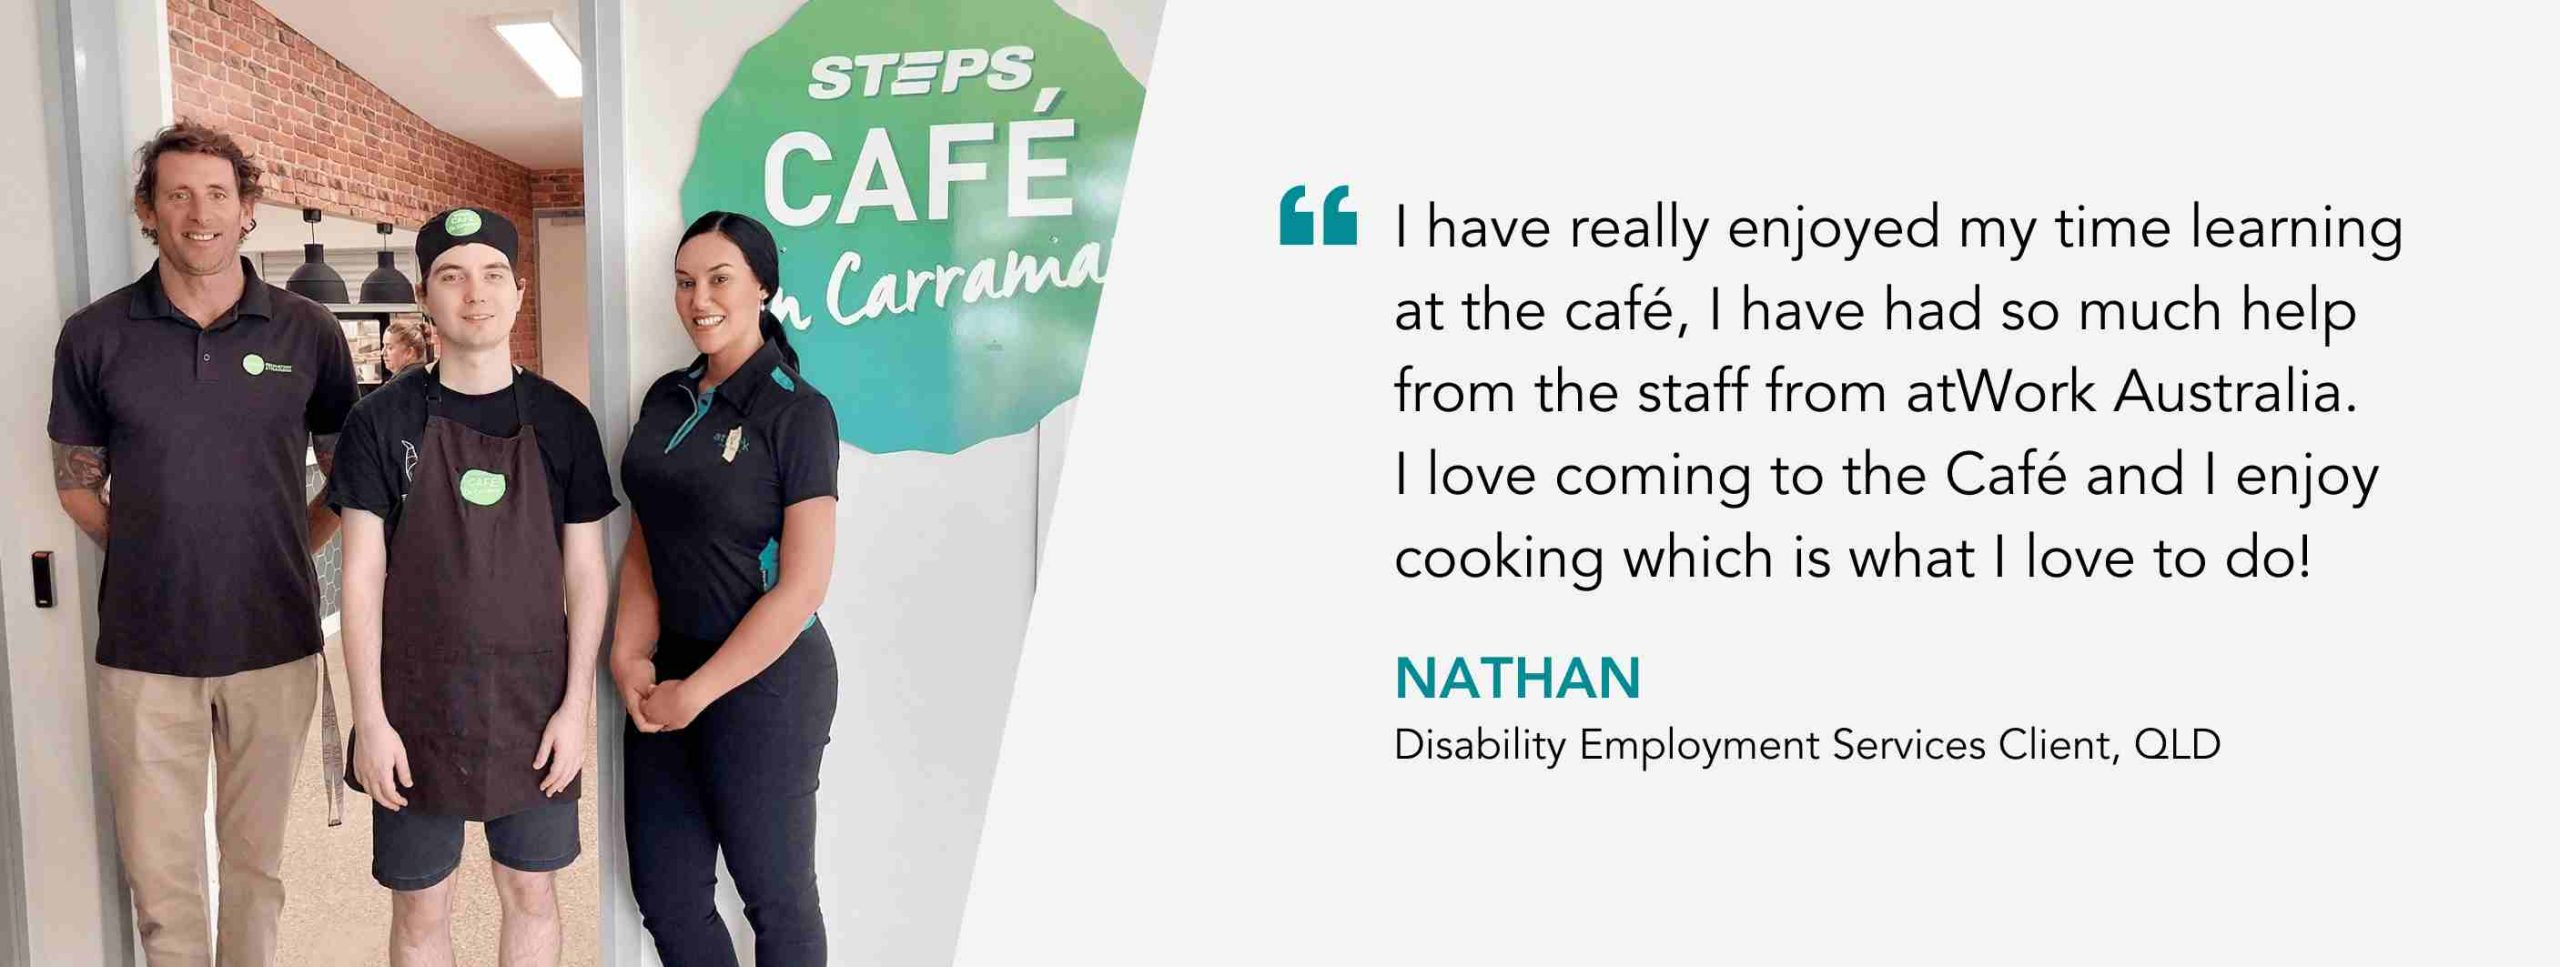 I have really enjoyed my time learning at the café, I have had so much help from the staff from atWork Australia. I love coming to the Café and I enjoy cooking which is what I love to do! Nathan, Disability Employment Services Client, QLD